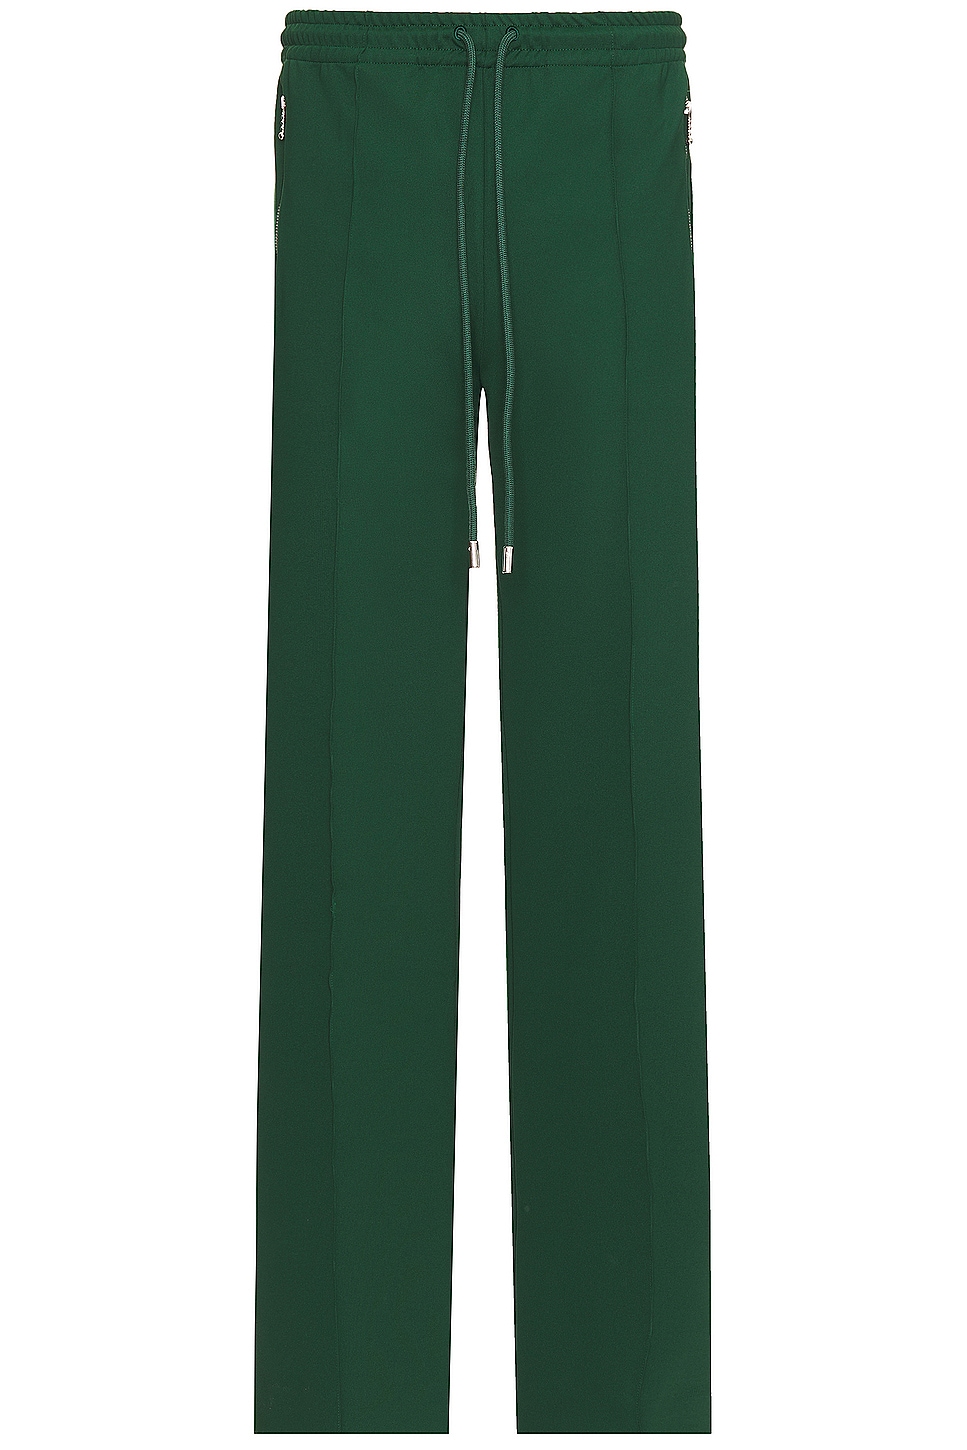 Image 1 of JW Anderson Bootcut Track Pants in Racing Green